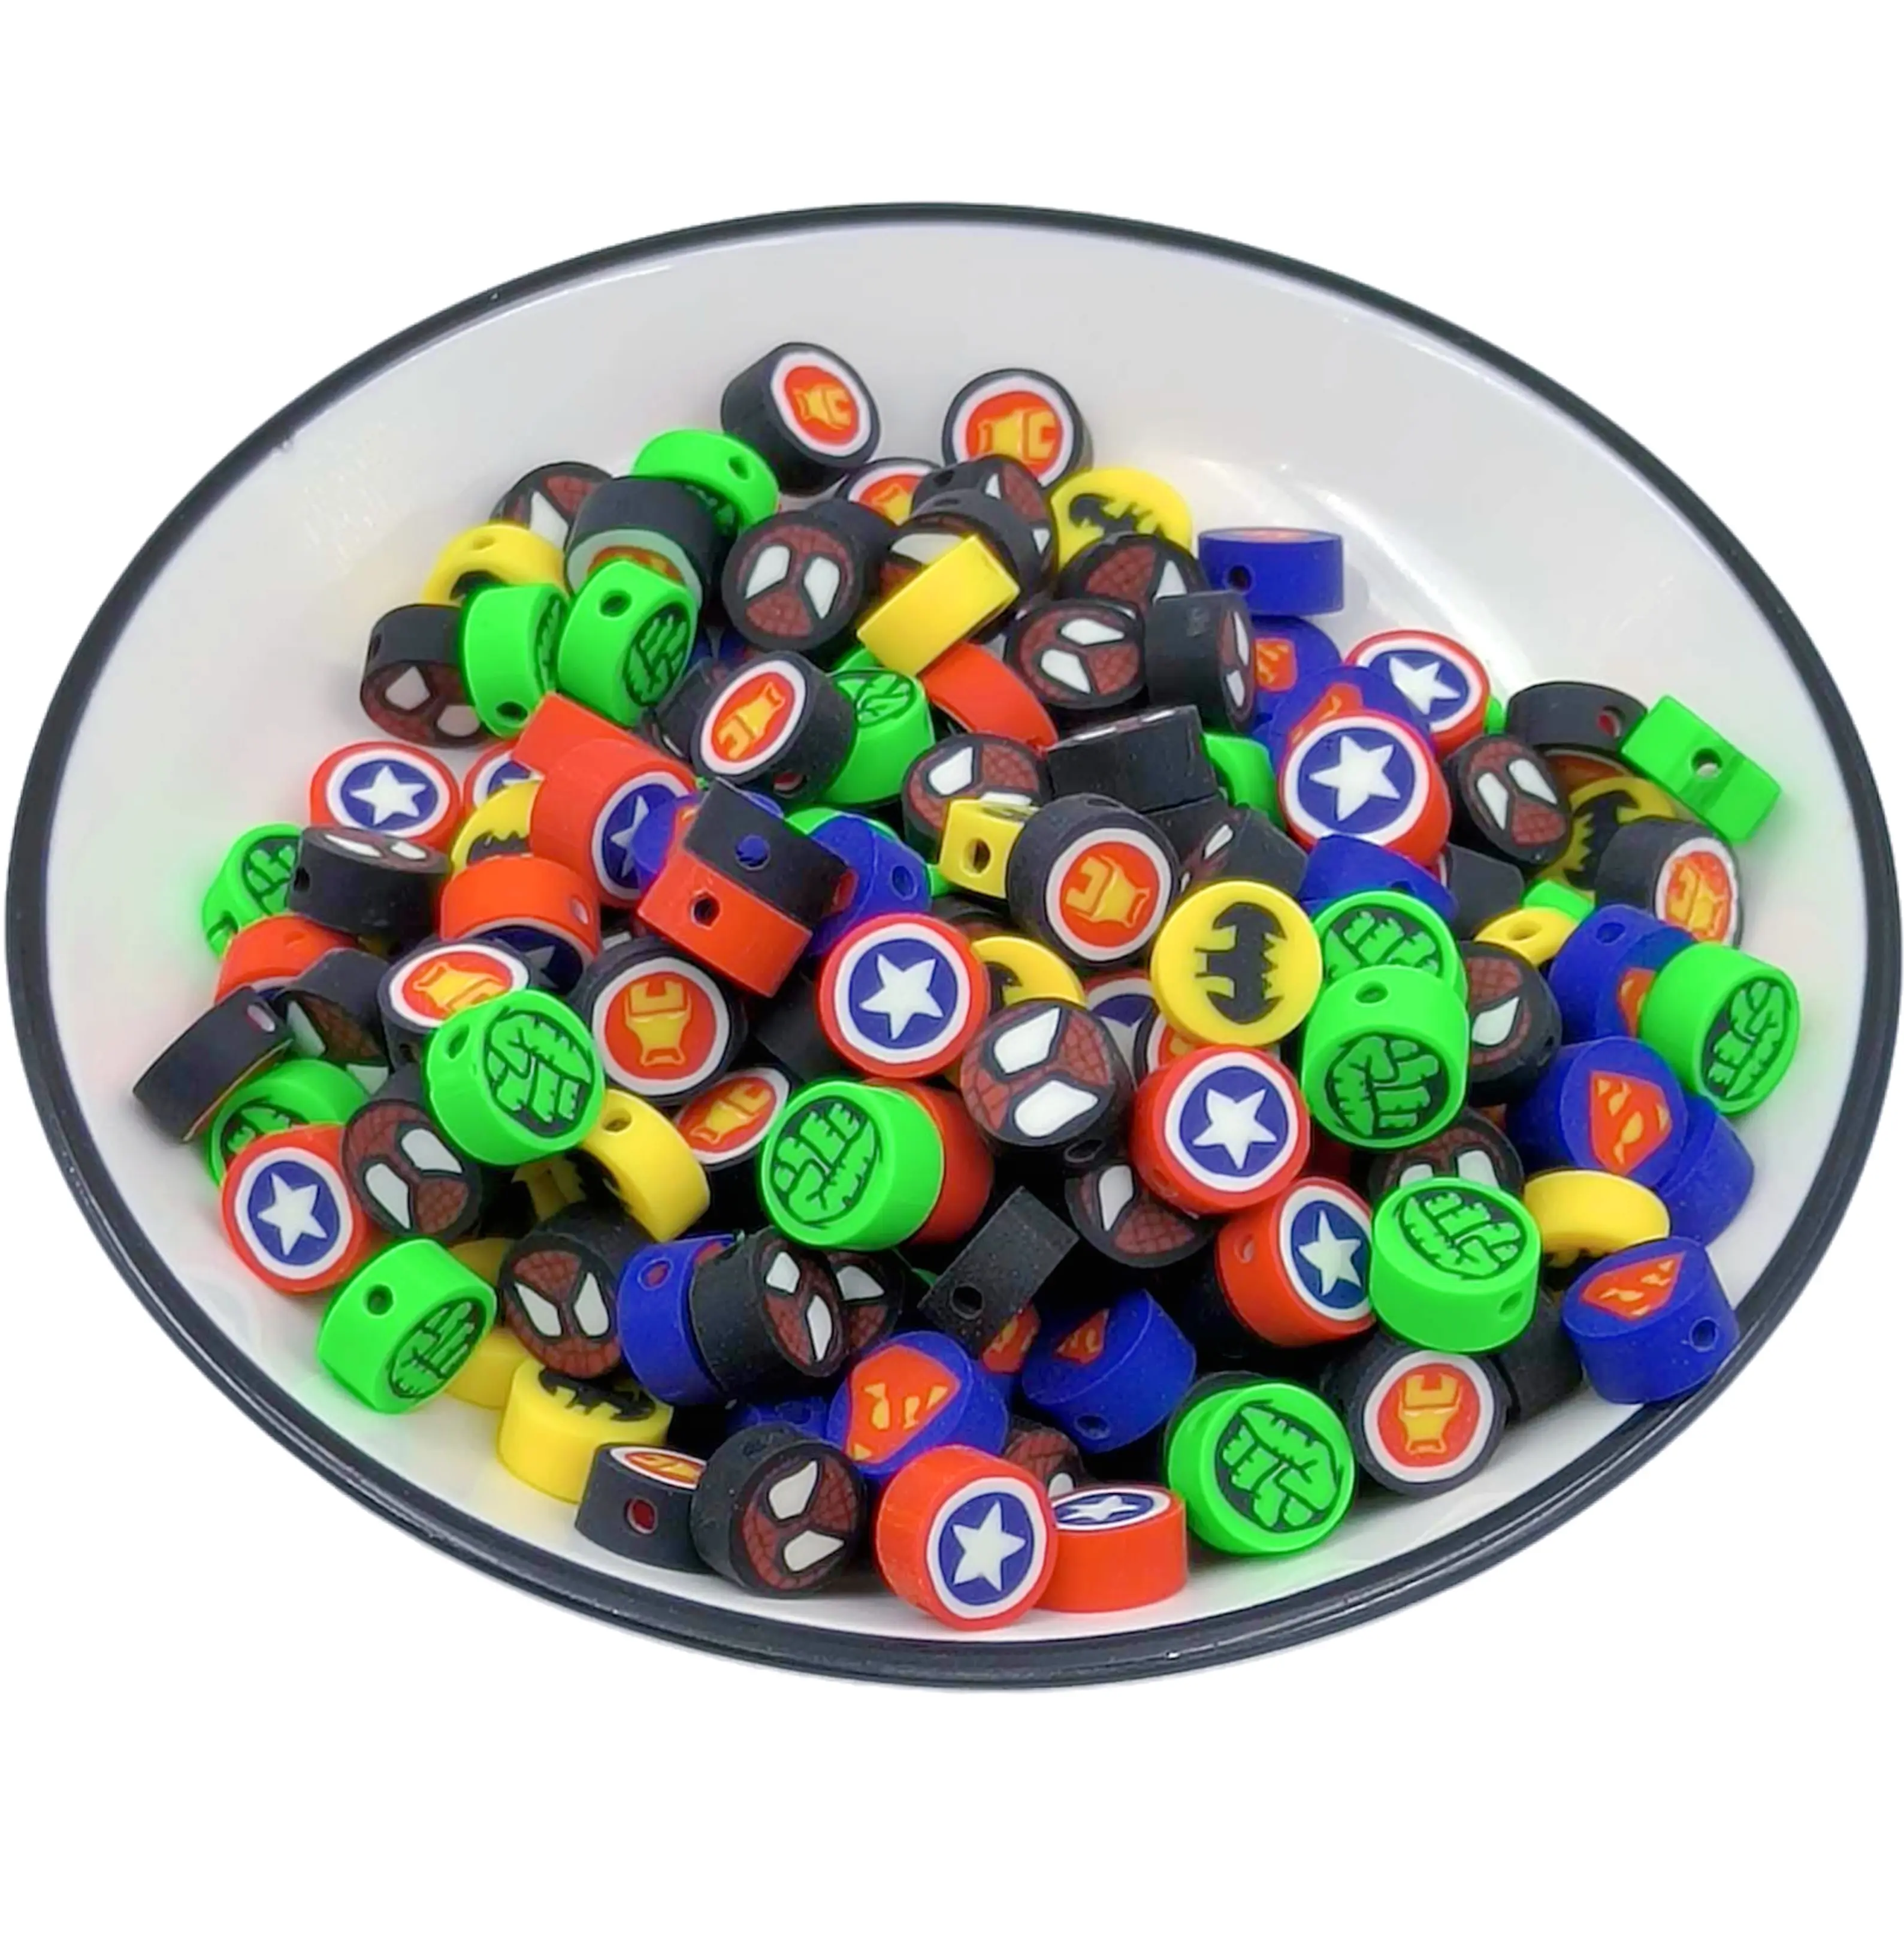 10mm cartoon League of Legends soft ceramic polymer slice DI jewelry bracelet with necklace loose beads wholesale